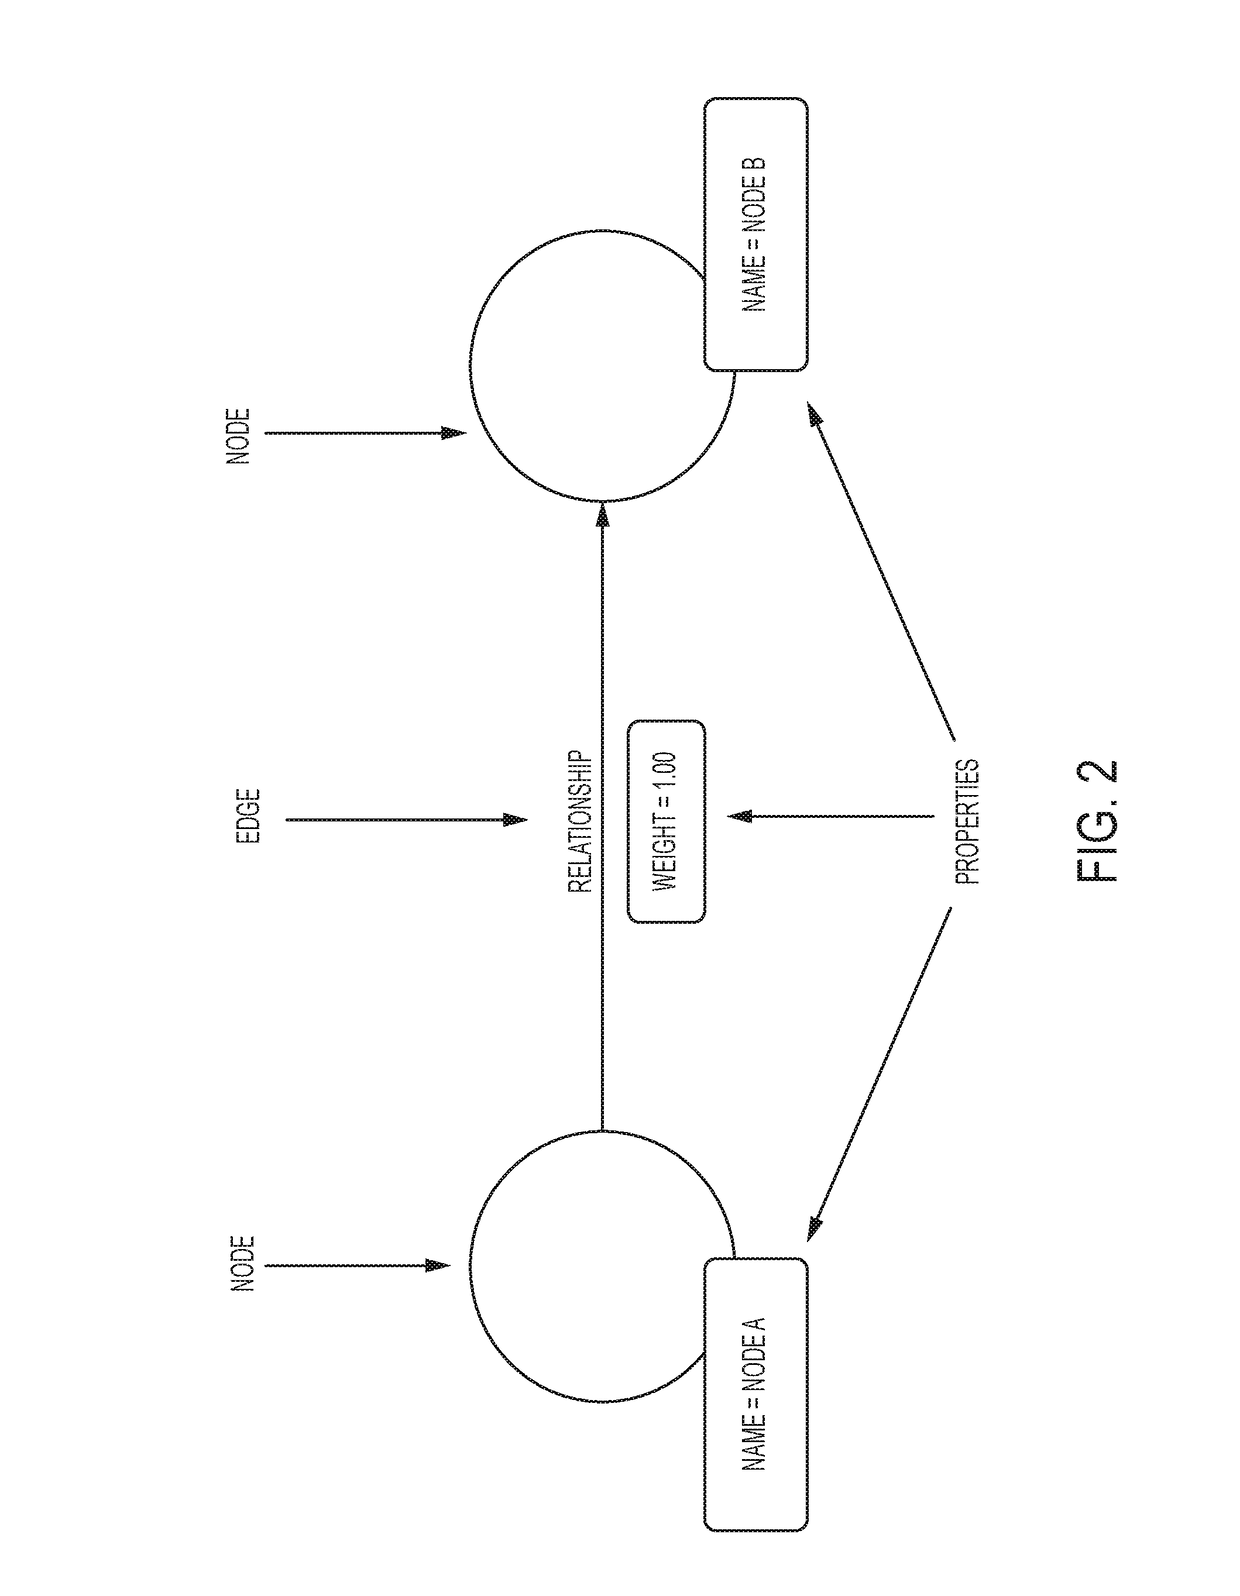 Systems and methods for investigating and evaluating financial crime and sanctions-related risks